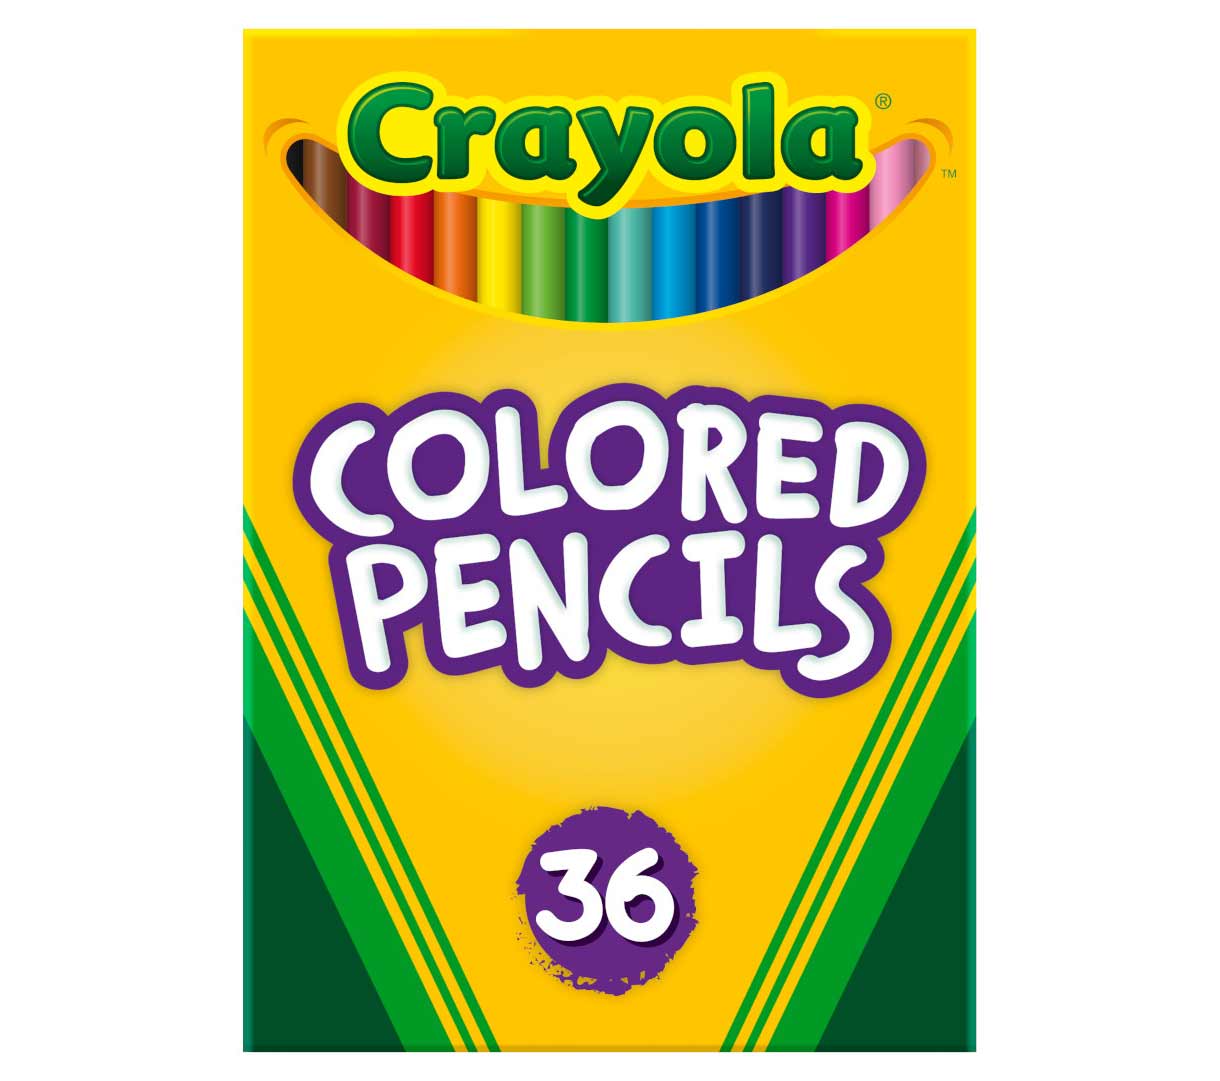 Crayola Colored Pencils For Adults (50 Count), Colored Pencil Set, Pair  With Adult Coloring Books, Art Supplies, Holiday Gifts [ Exclusive]